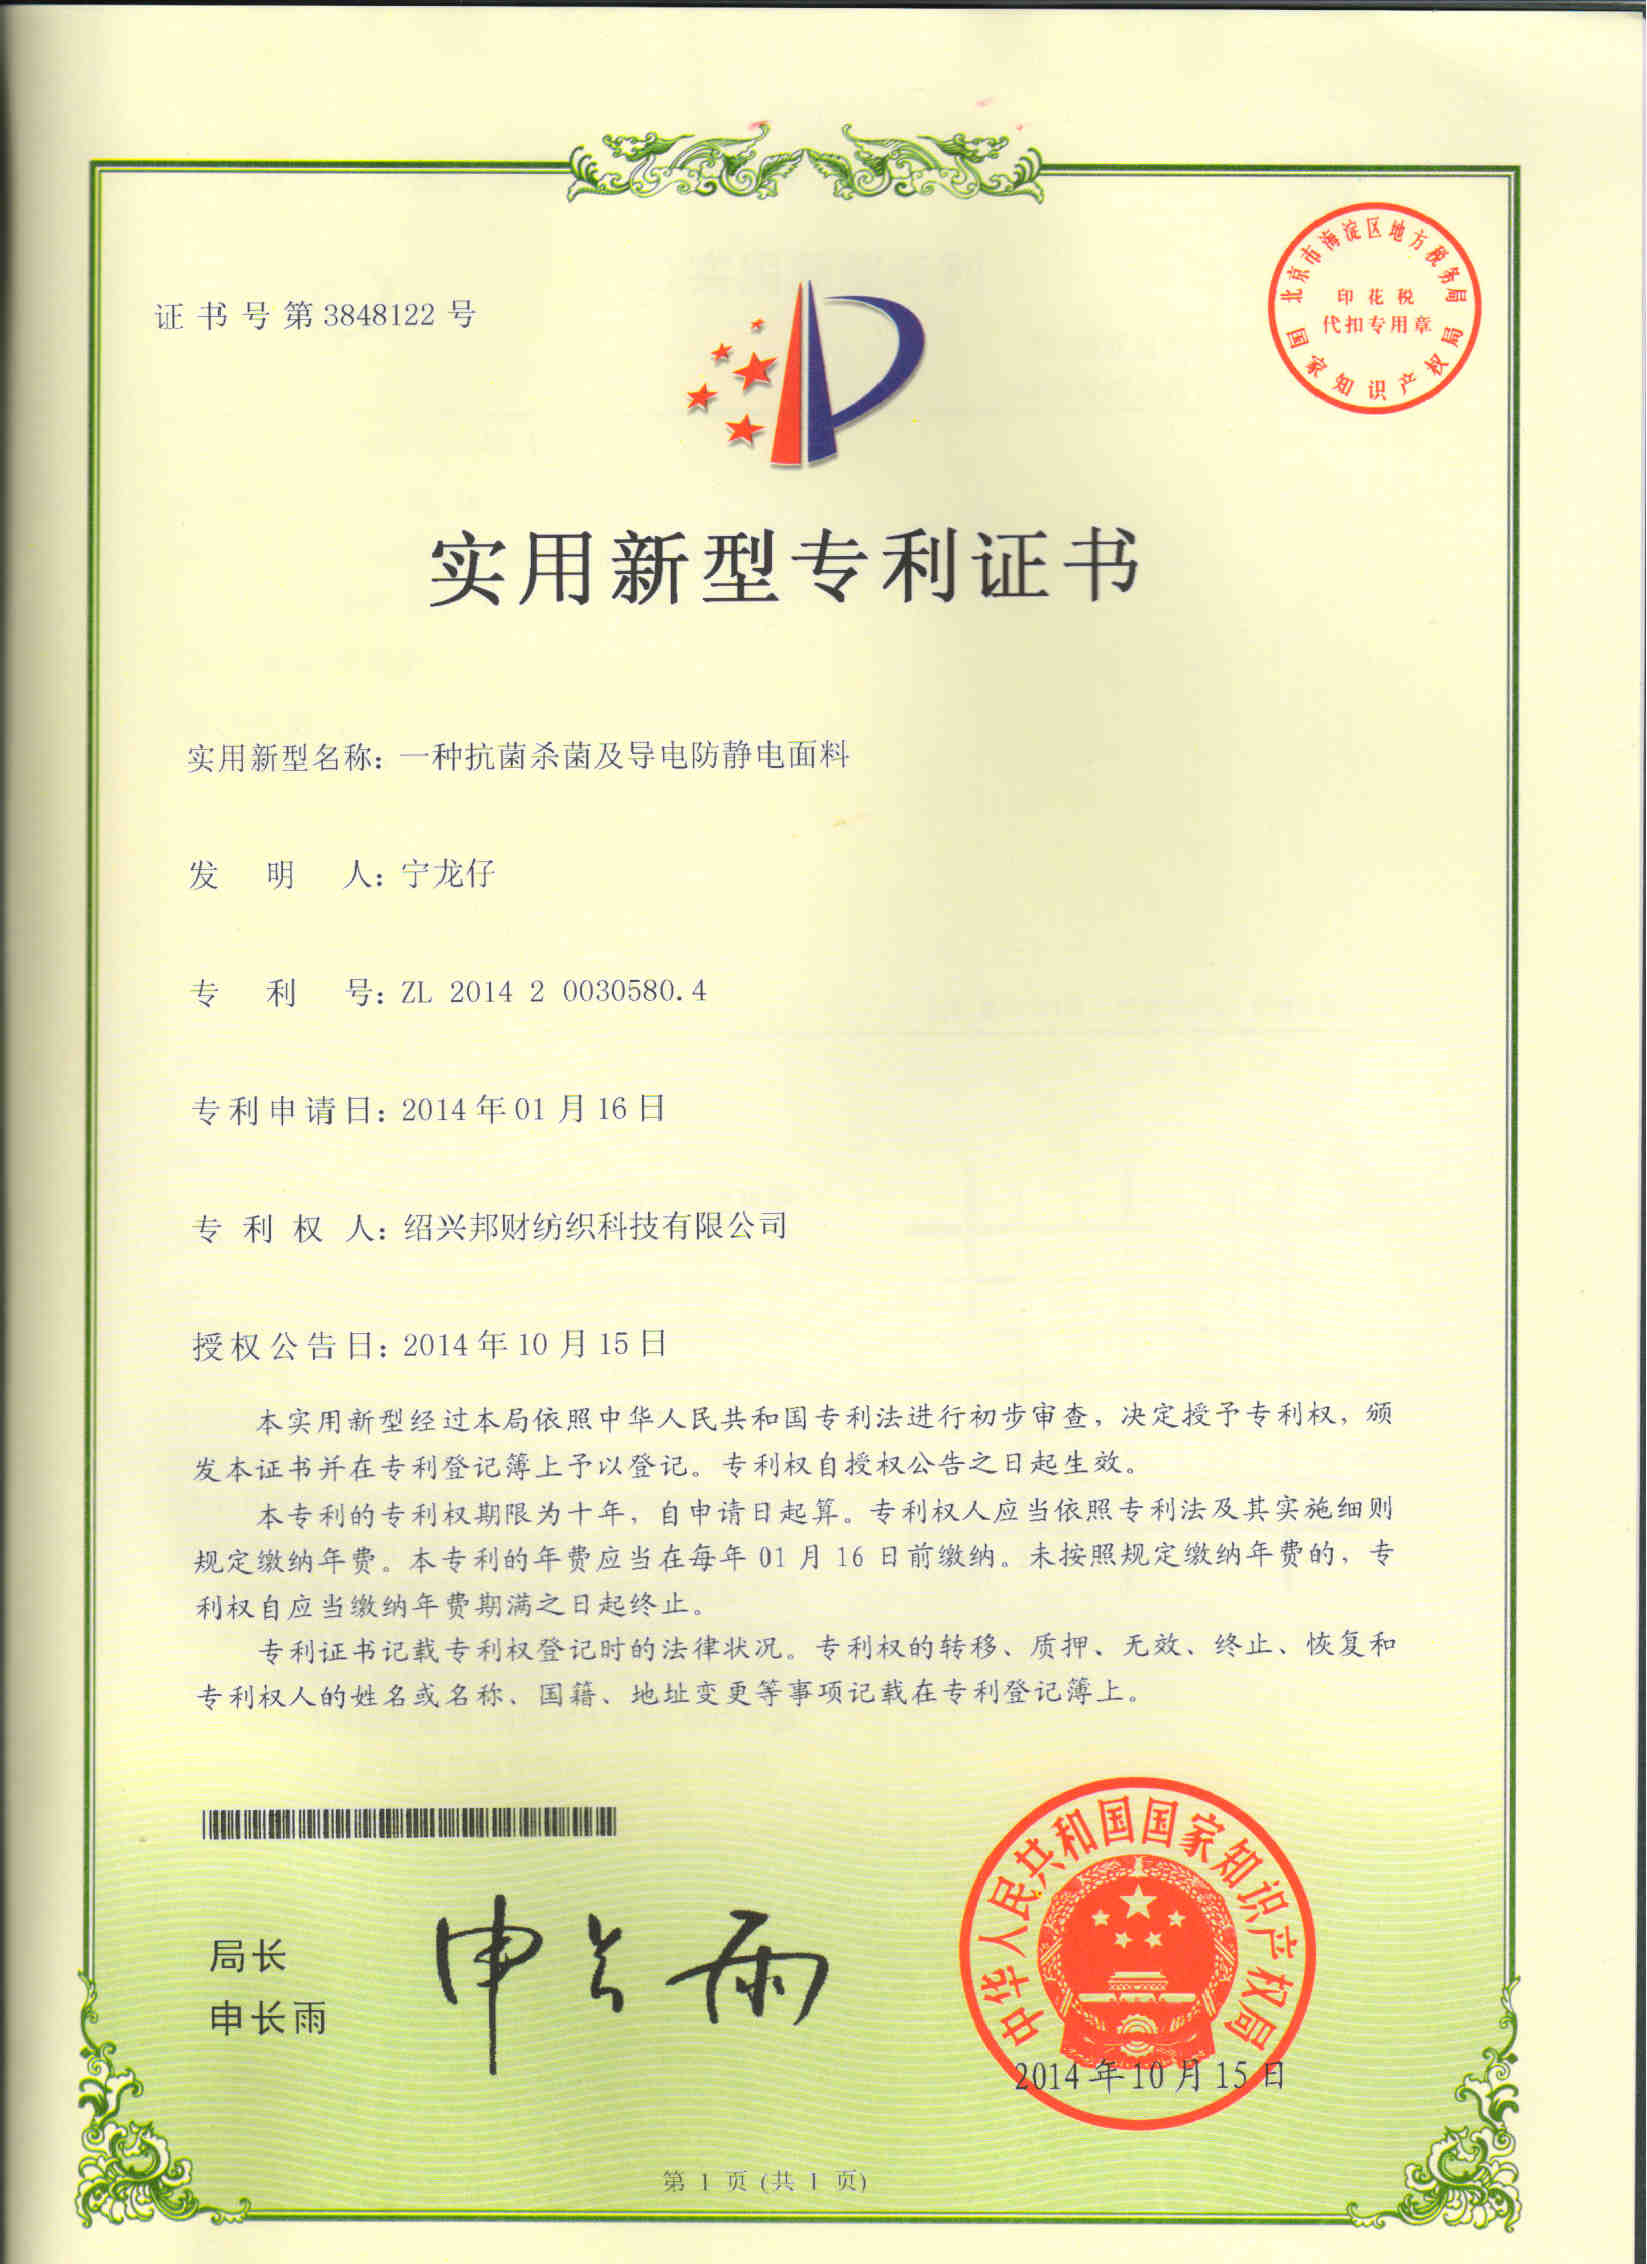 The successful application of the company's product patent